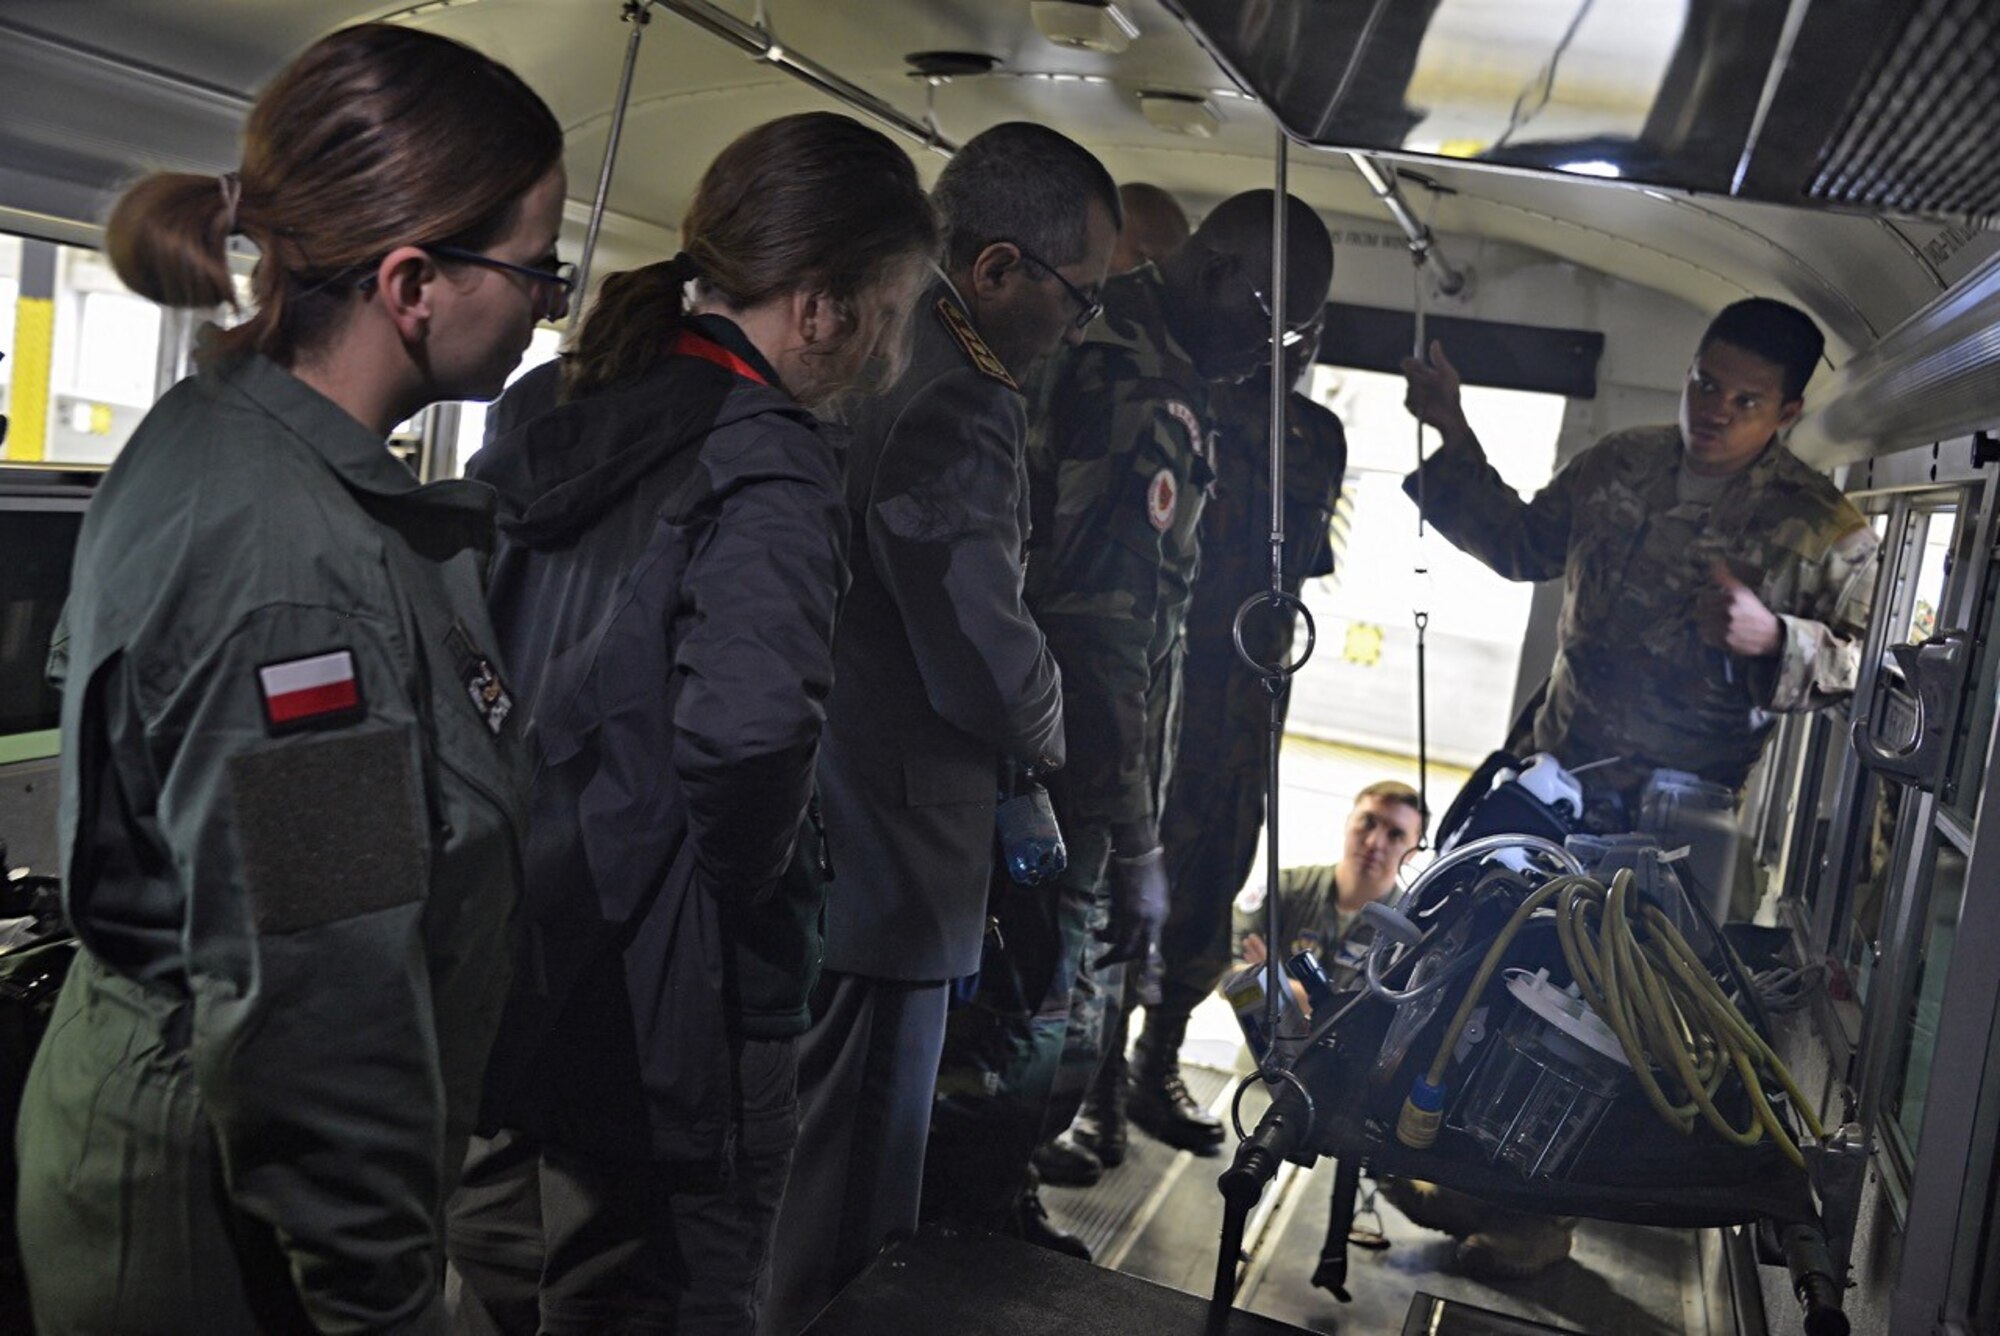 Medical professionals from around Europe and Africa receive small-group training at Ramstein Air Base, Germany, April 3, 2019. The 2019 European African Military Nursing Exchange is the 6th iteration of its kind, with extensive planning and coordination to connect partner nations in a collaborative environment that promotes hands-on training scenarios. (U.S. Air Force photo by Tech. Sgt. Jessica Hines)